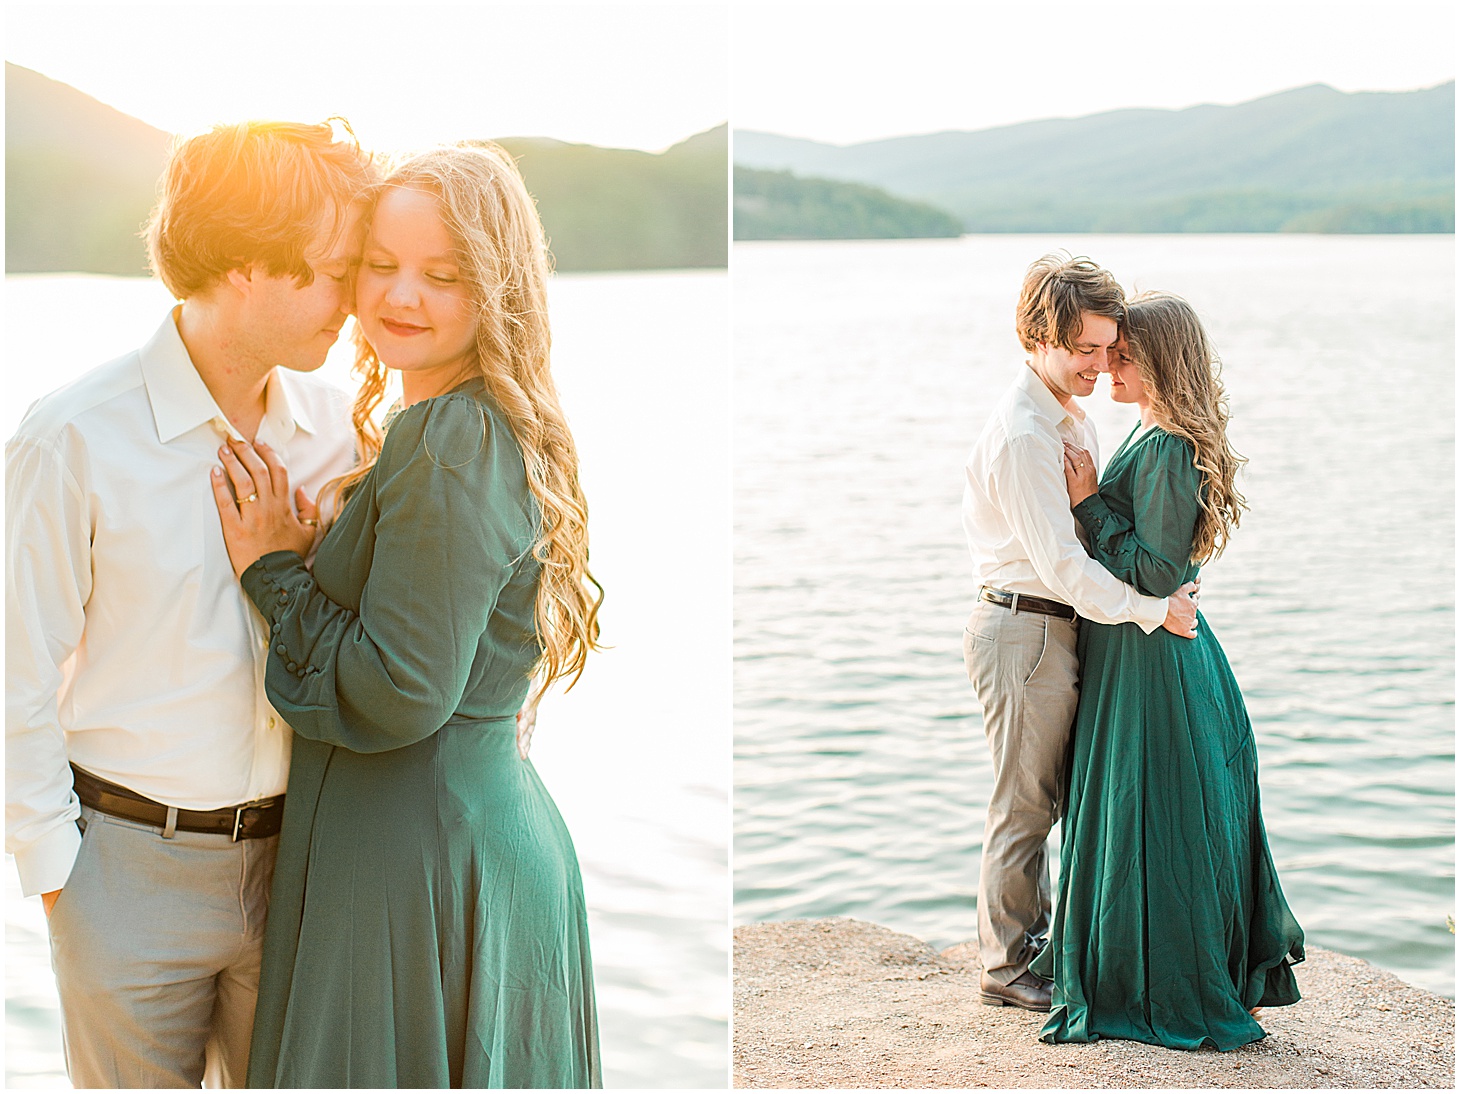 carvinscoveengagementsession_roanokeengagementsession_carvinscove_virginiawedding_virginiaweddingphotographer_vaweddingphotographer_photo_0041.jpg